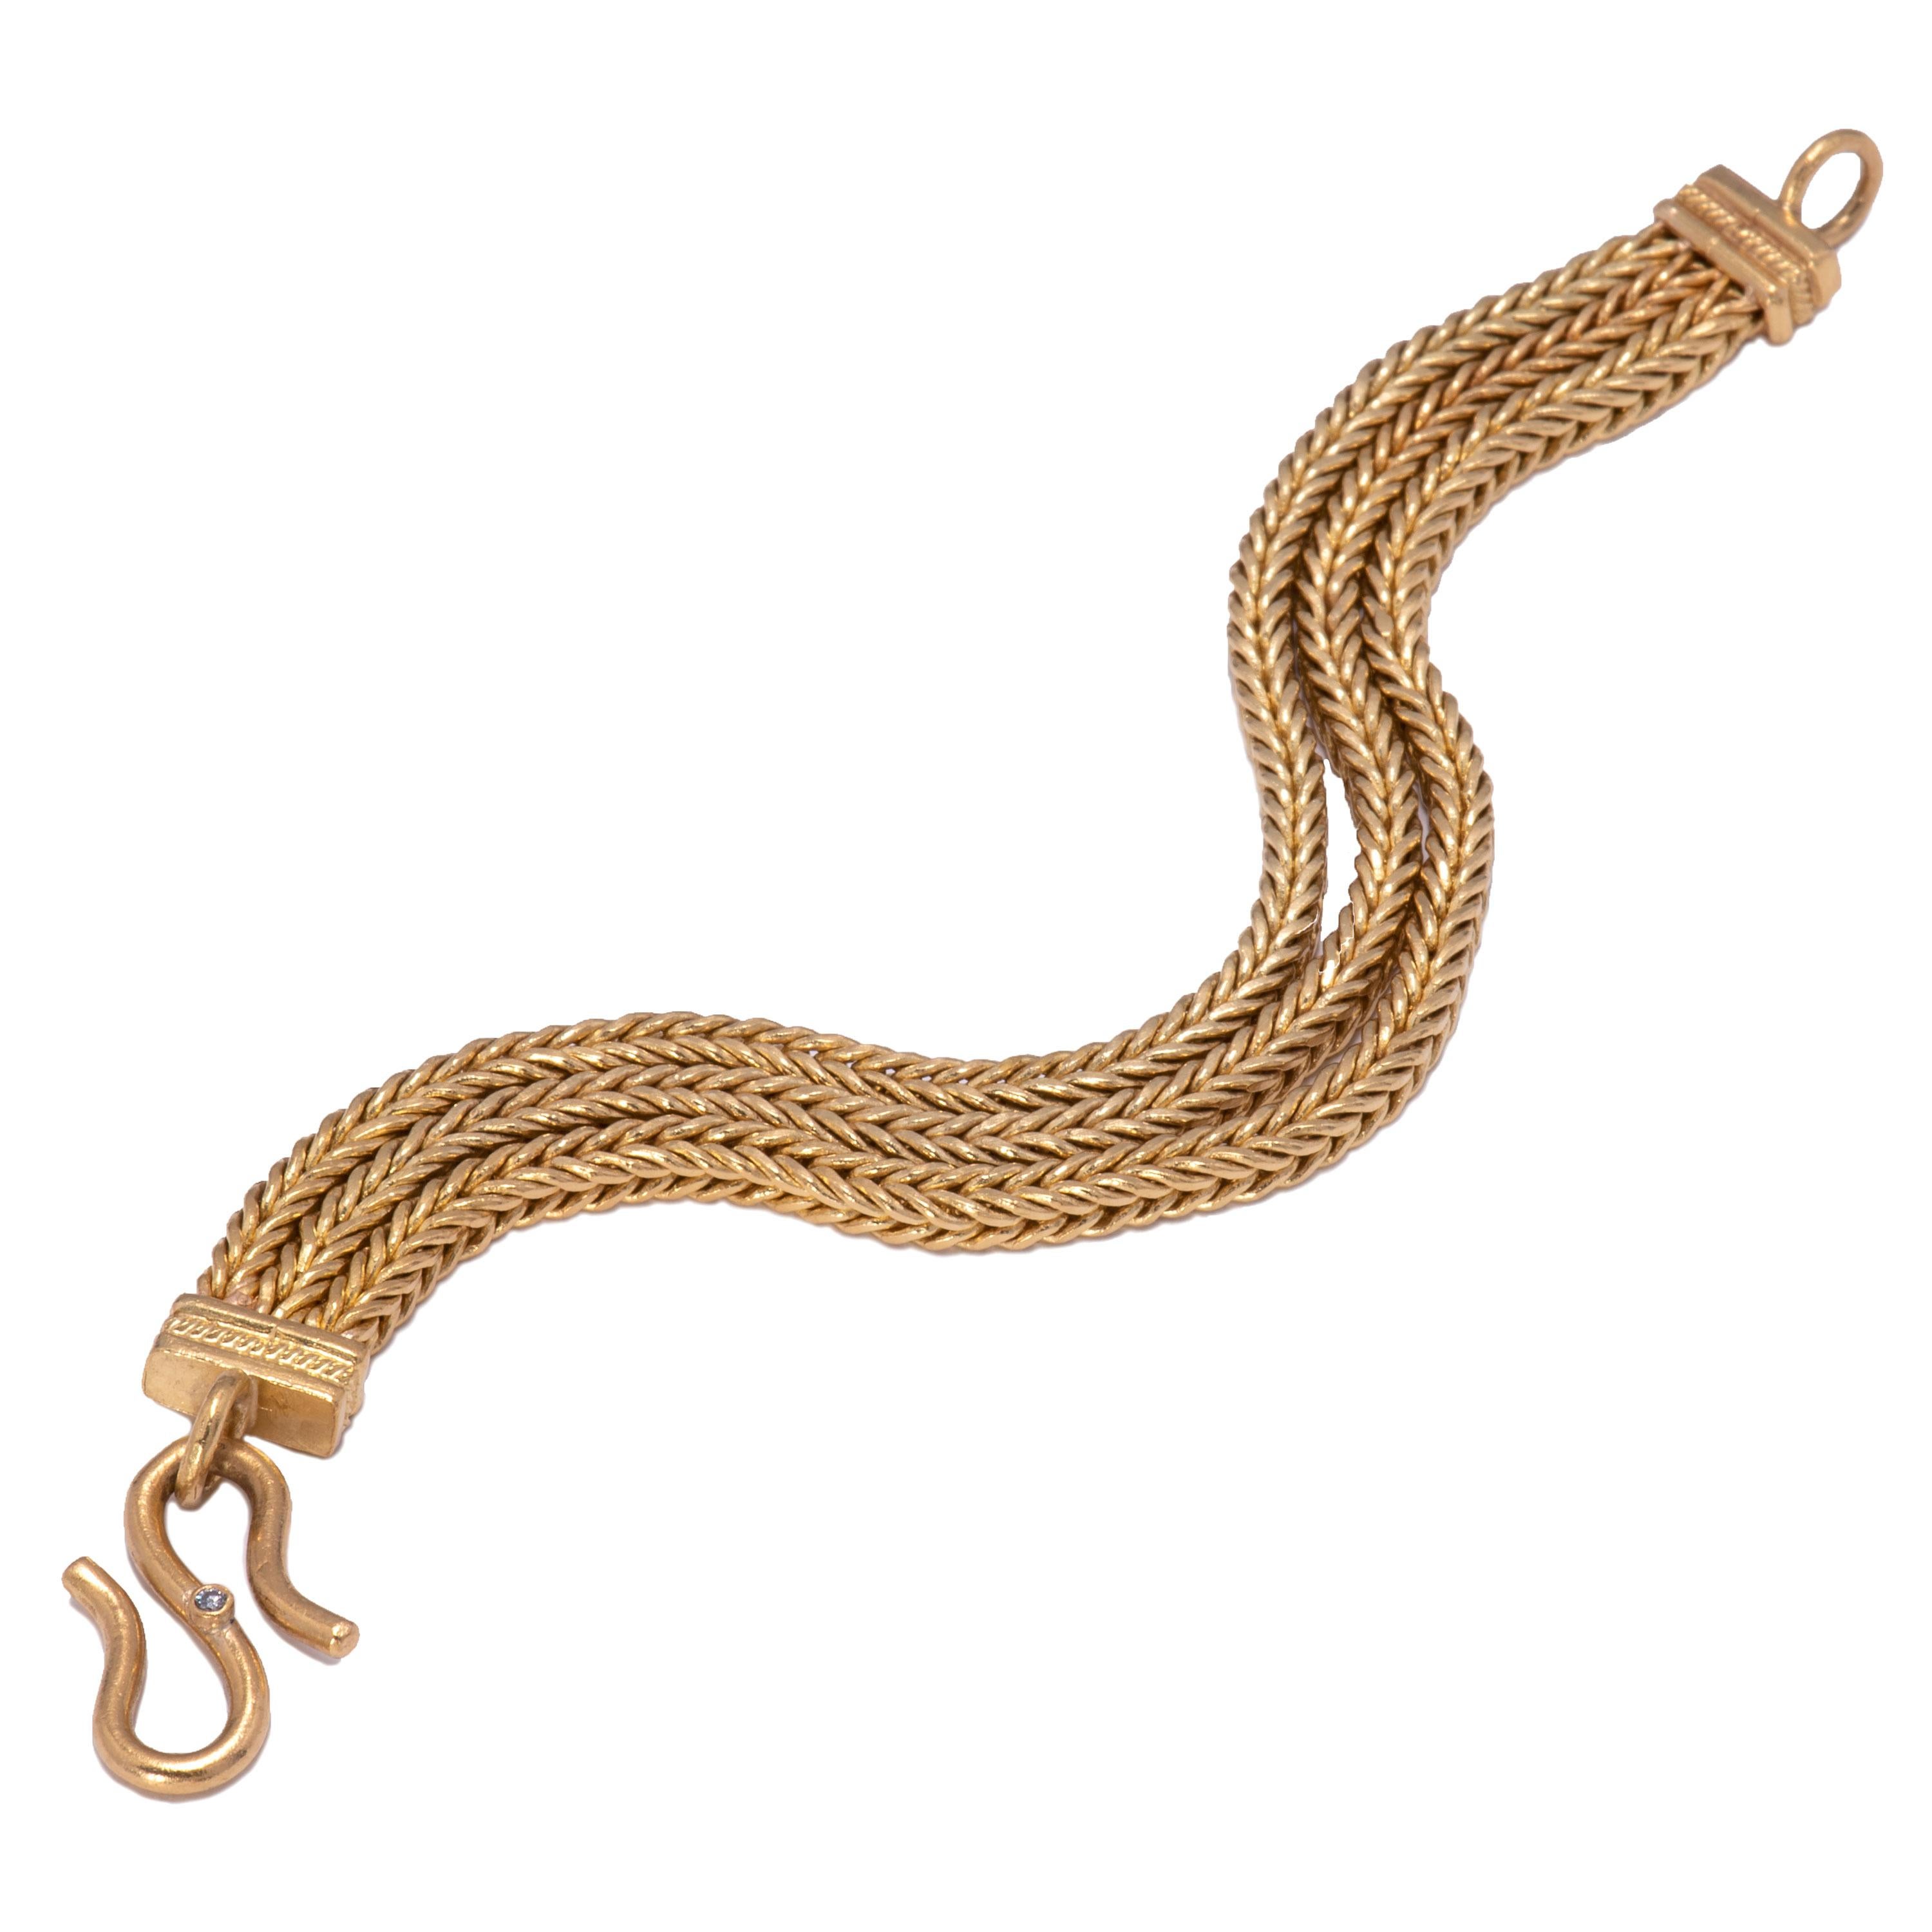 Three lengths of handwoven 22k gold are fused at boxed ends and secure with a hand crafted 22k gold S clasp set with a white diamond. This triple strand bracelet by Keith Berge is 7.25